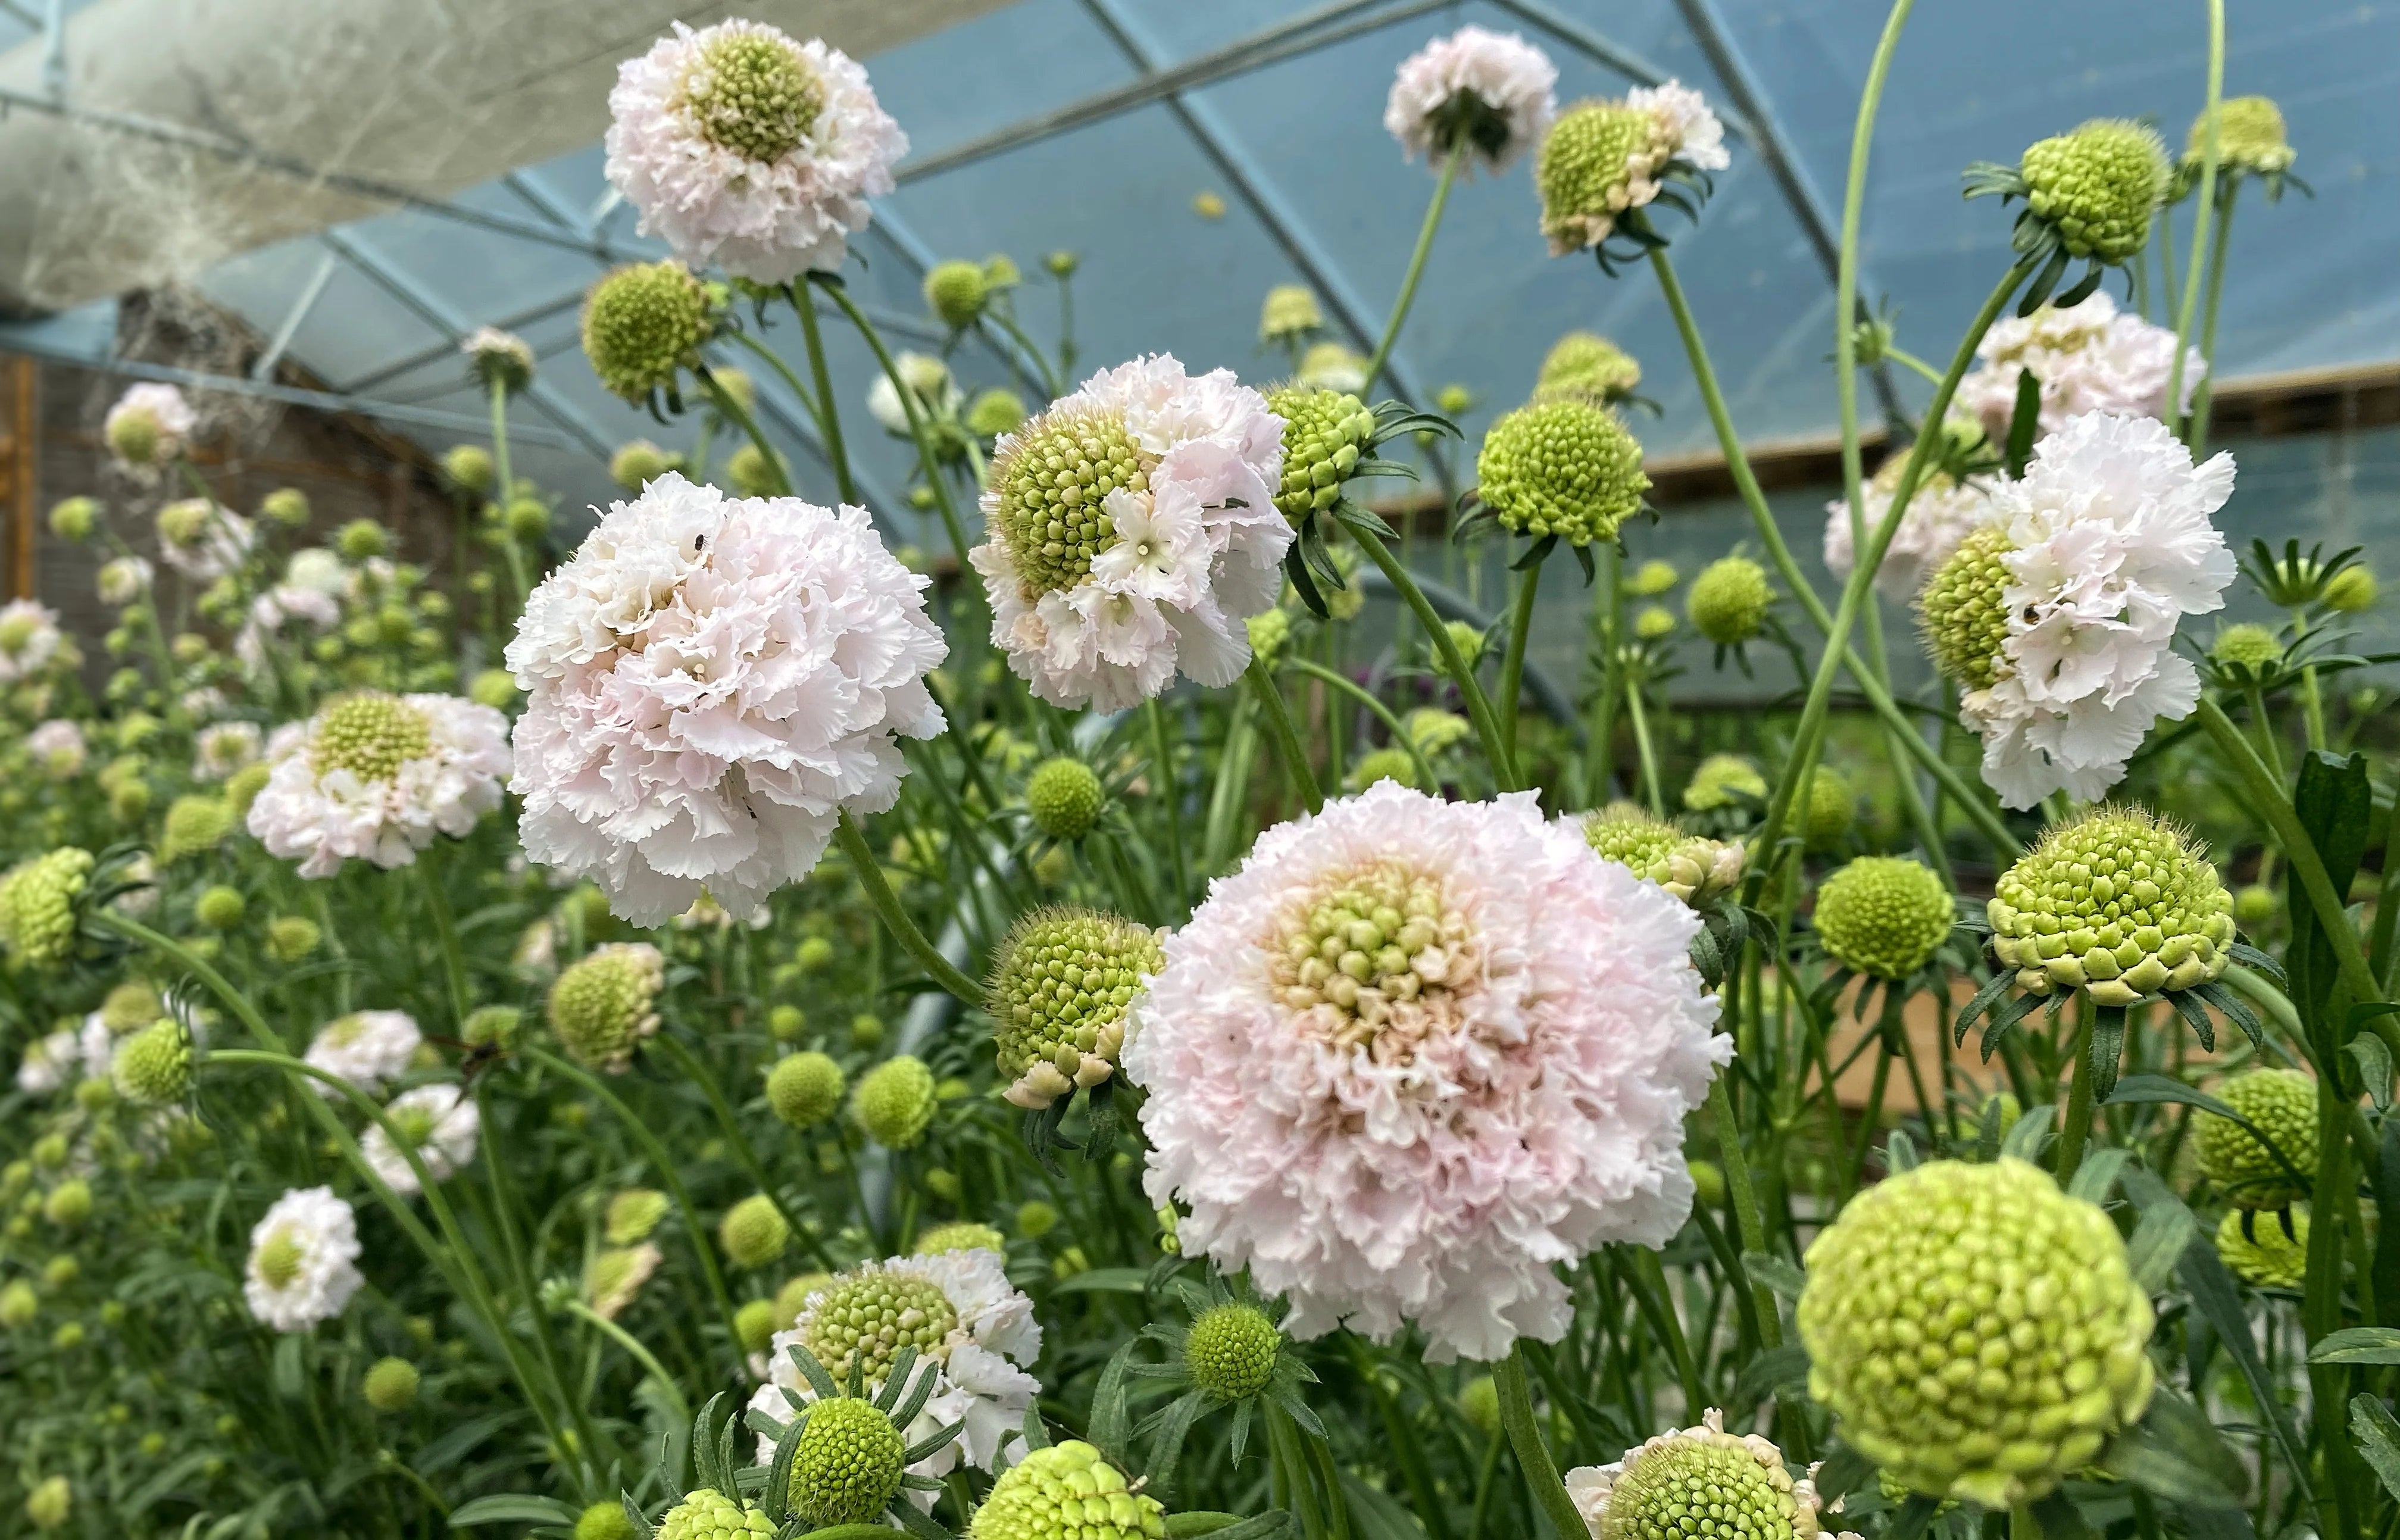 Scabiosa (Scabiosa) Flowers that Start with S